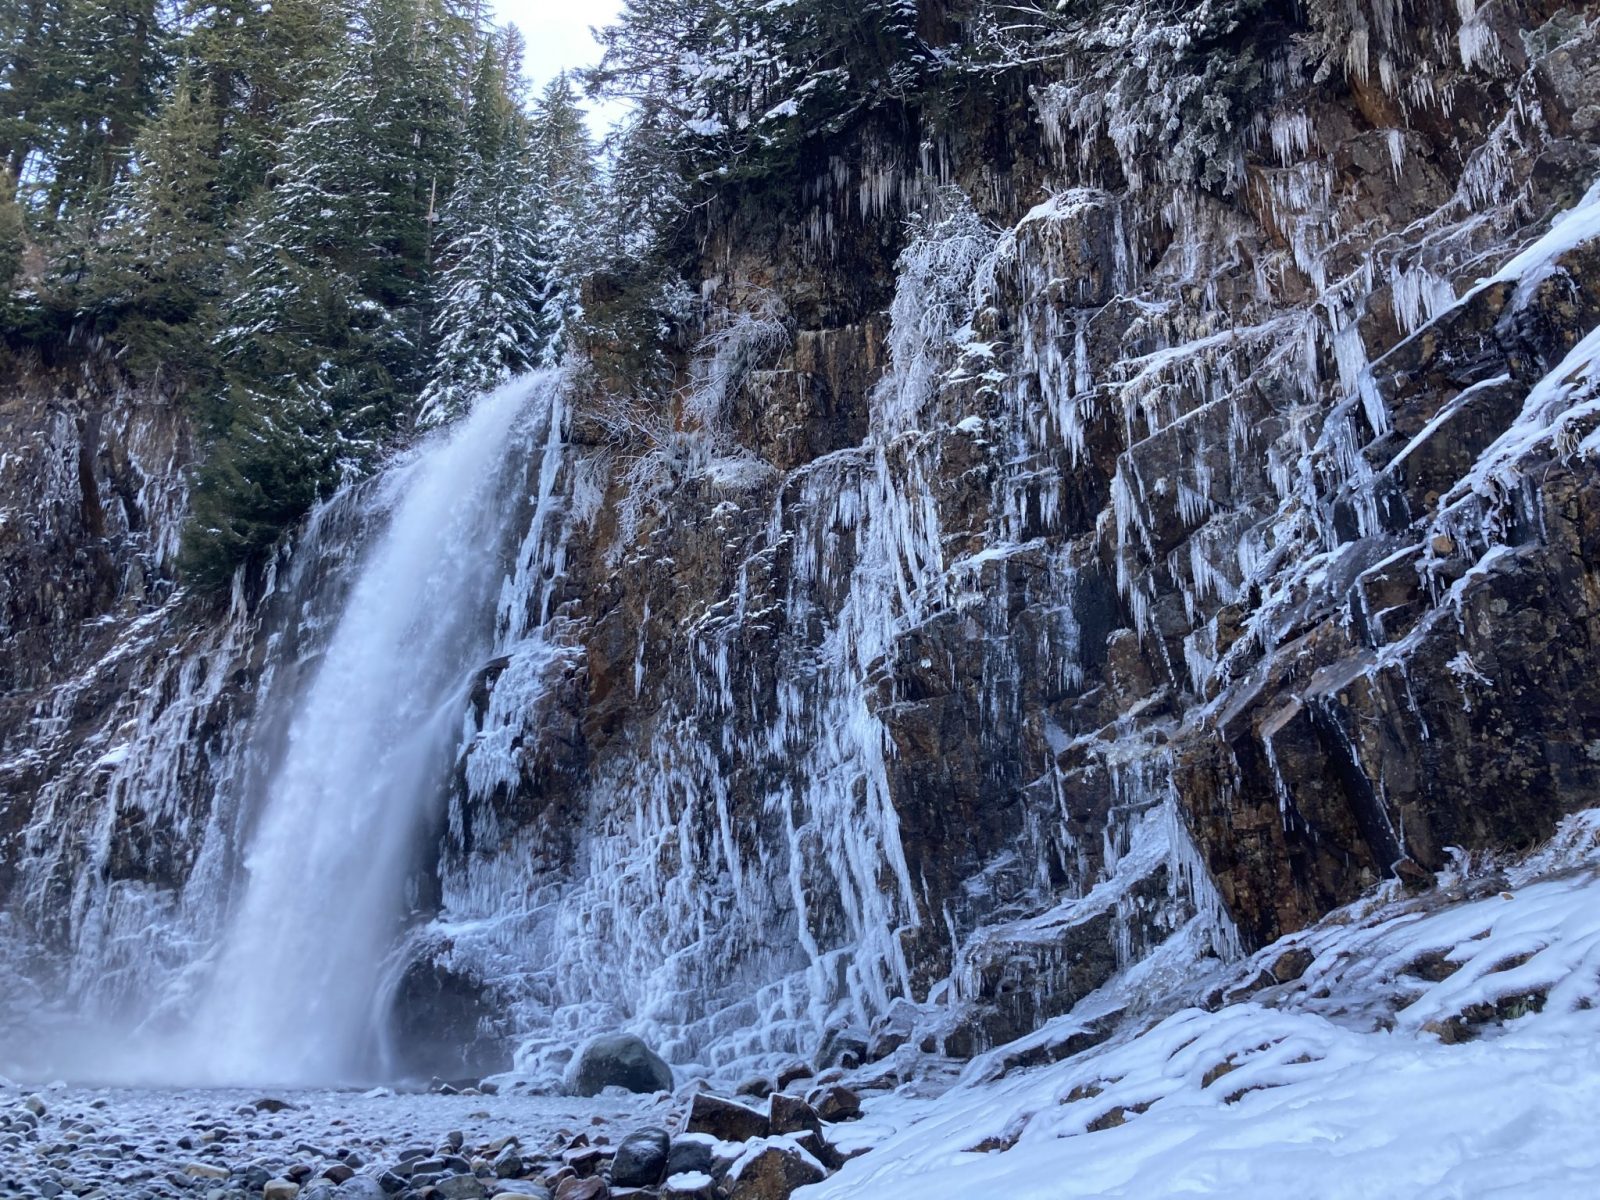 A powerful waterfall coming over a vertical rock face. The rocks are covered in icicles and the ground around the waterfall is covered in snow.